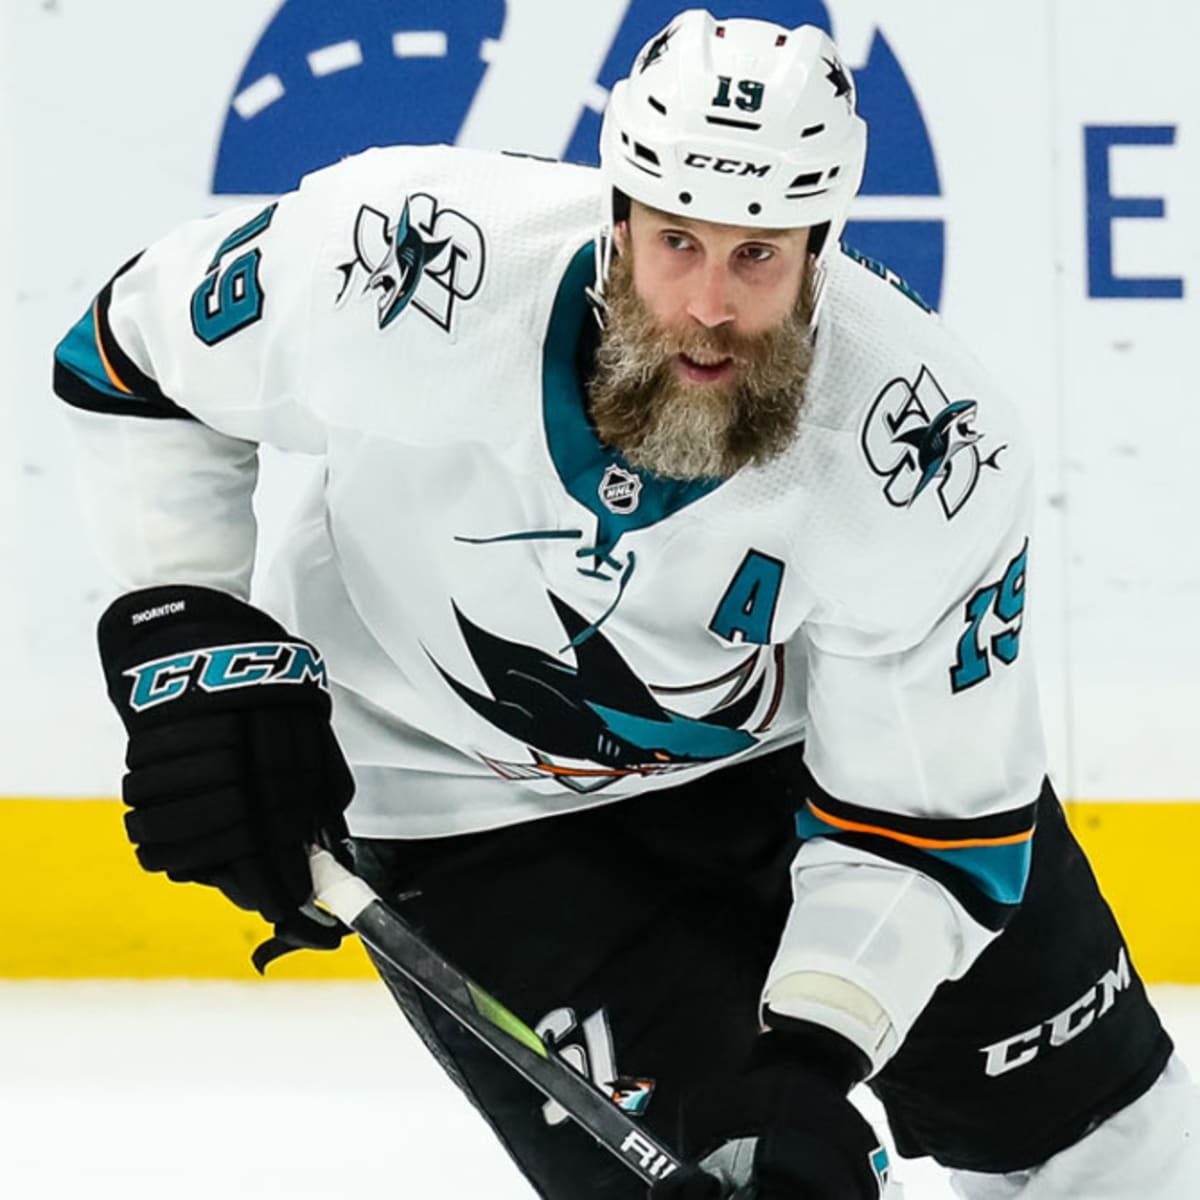 Joe Thornton re-signs with Sharks on 1-year deal, per report 